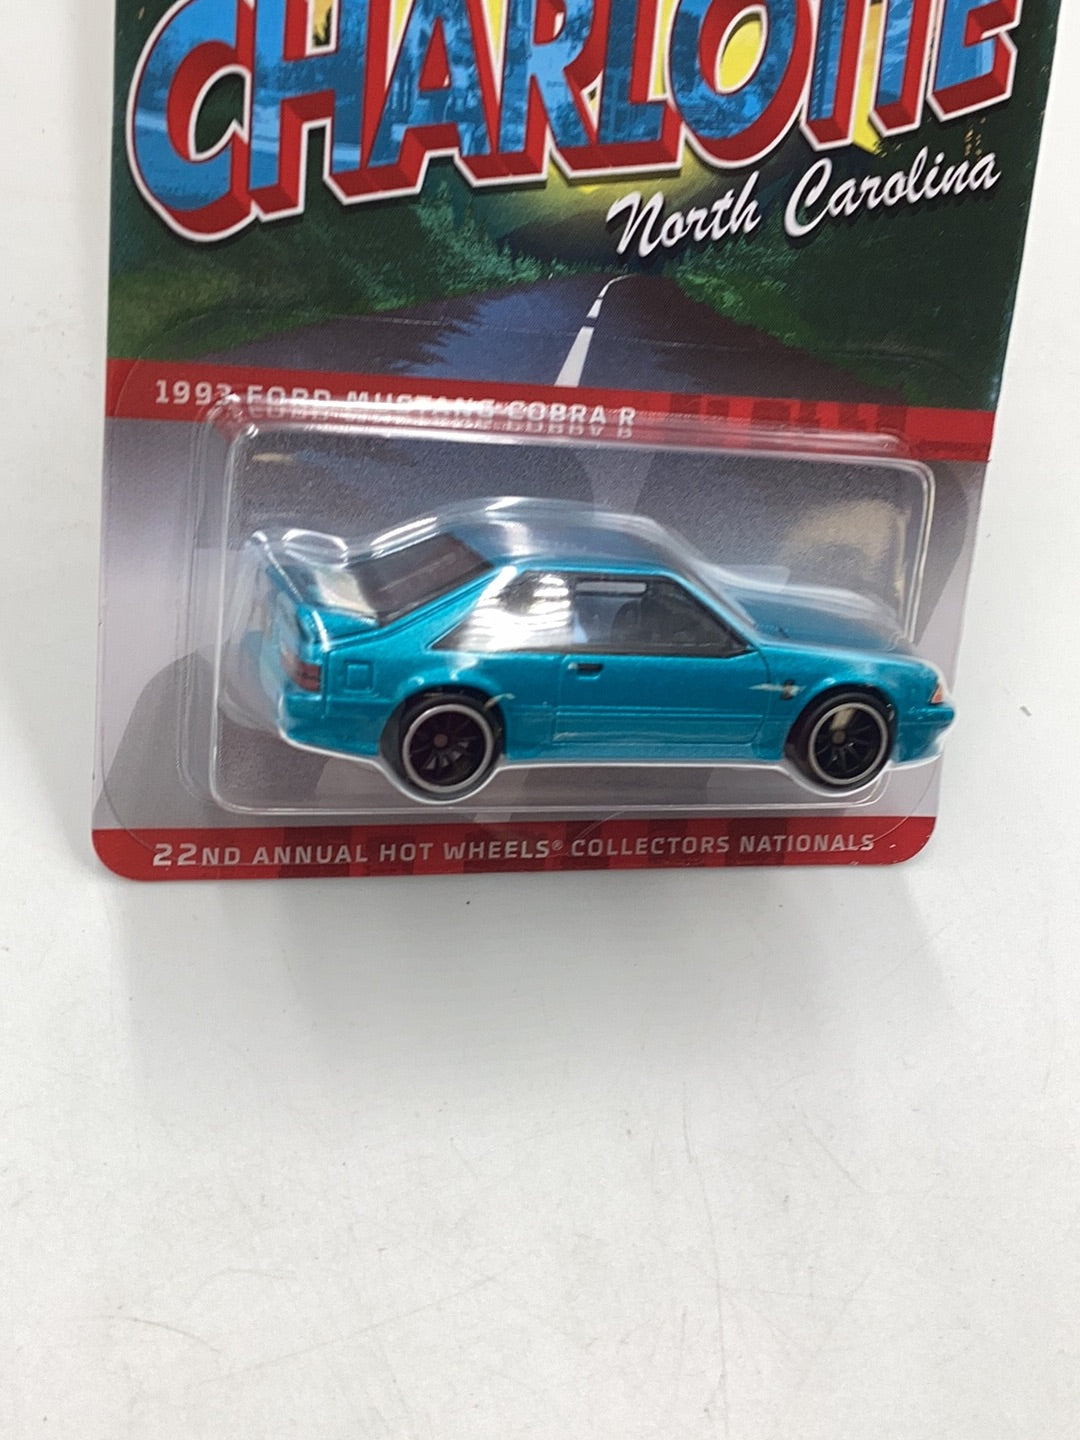 Hot wheels 22nd annual collectors Nationals dinner car 1993 Ford Mustang cobra r #952/4000